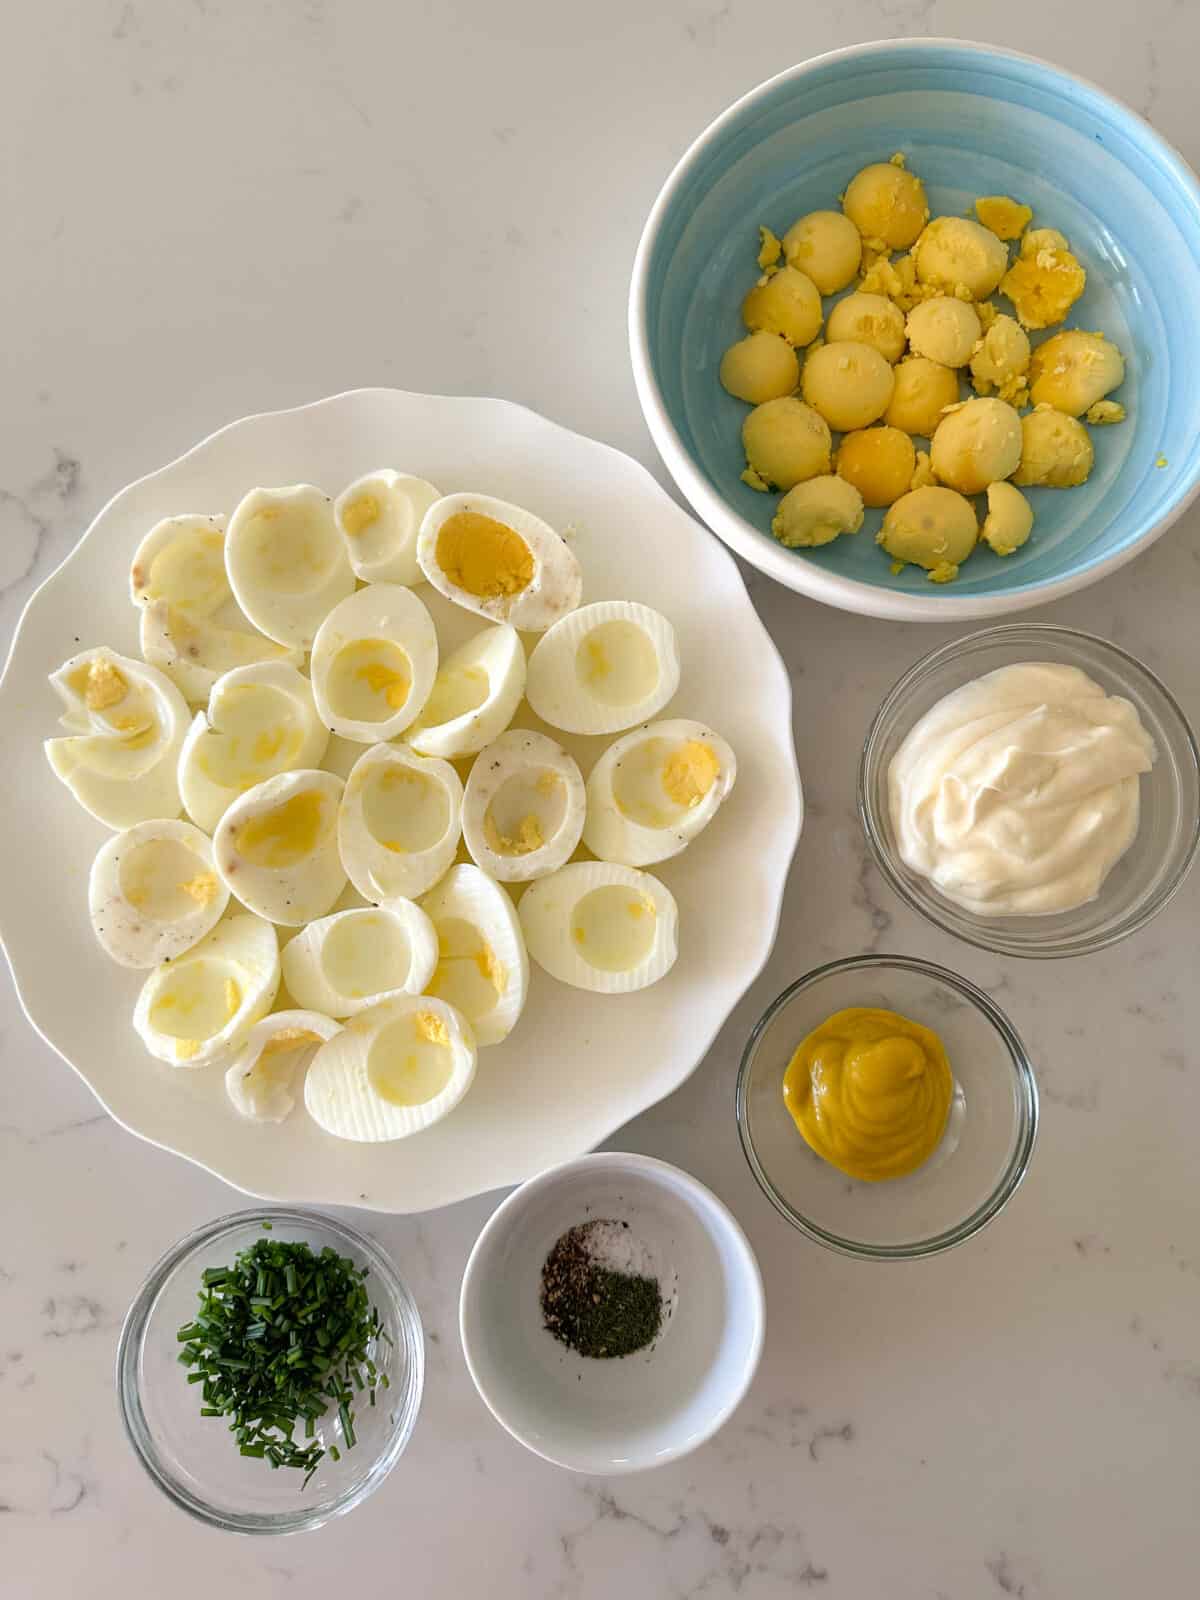 egg salad ingredients in bowls on counter